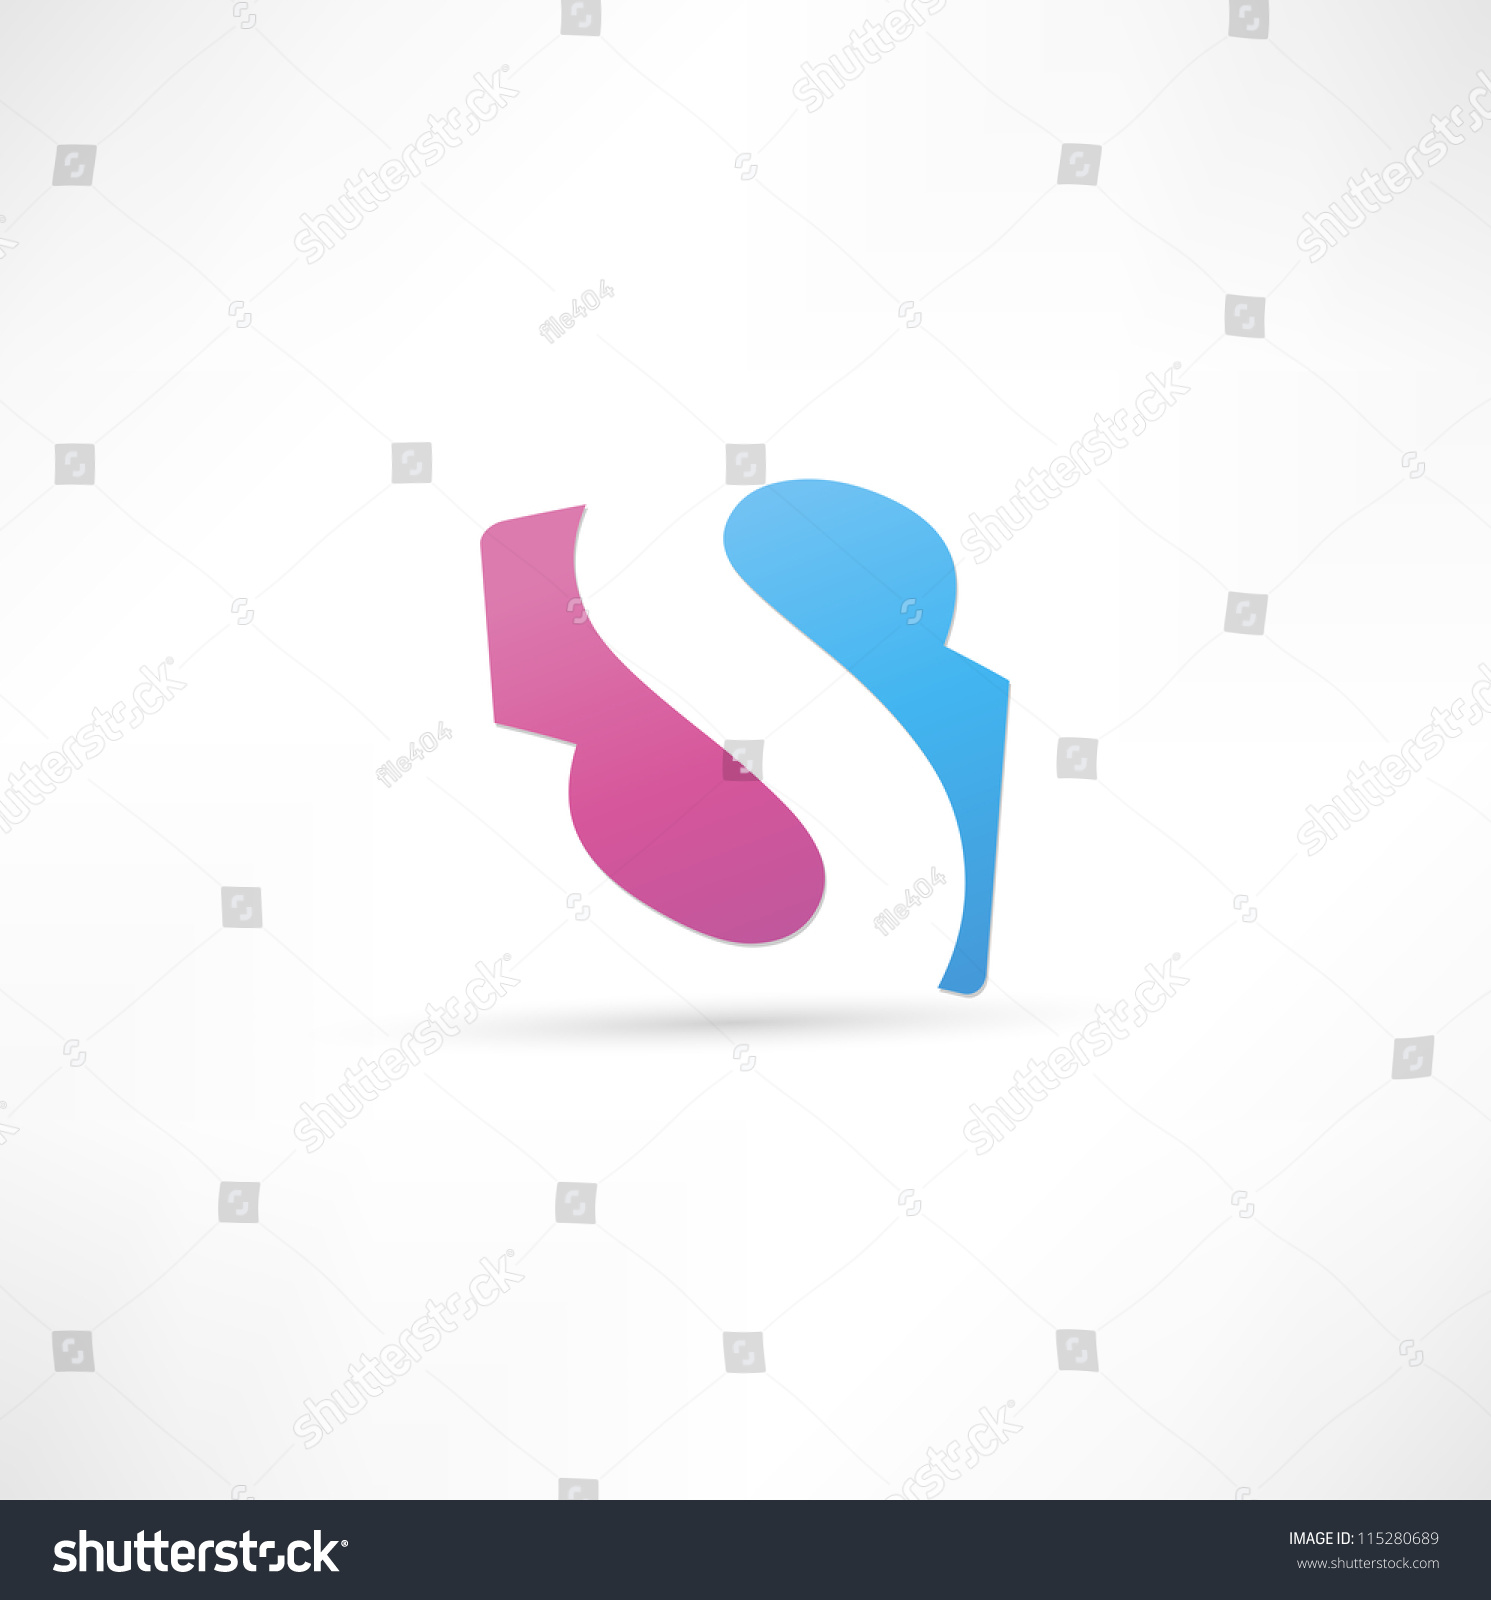 Abstract Icon Based On The Letter S Stock Vector Illustration 115280689 ...